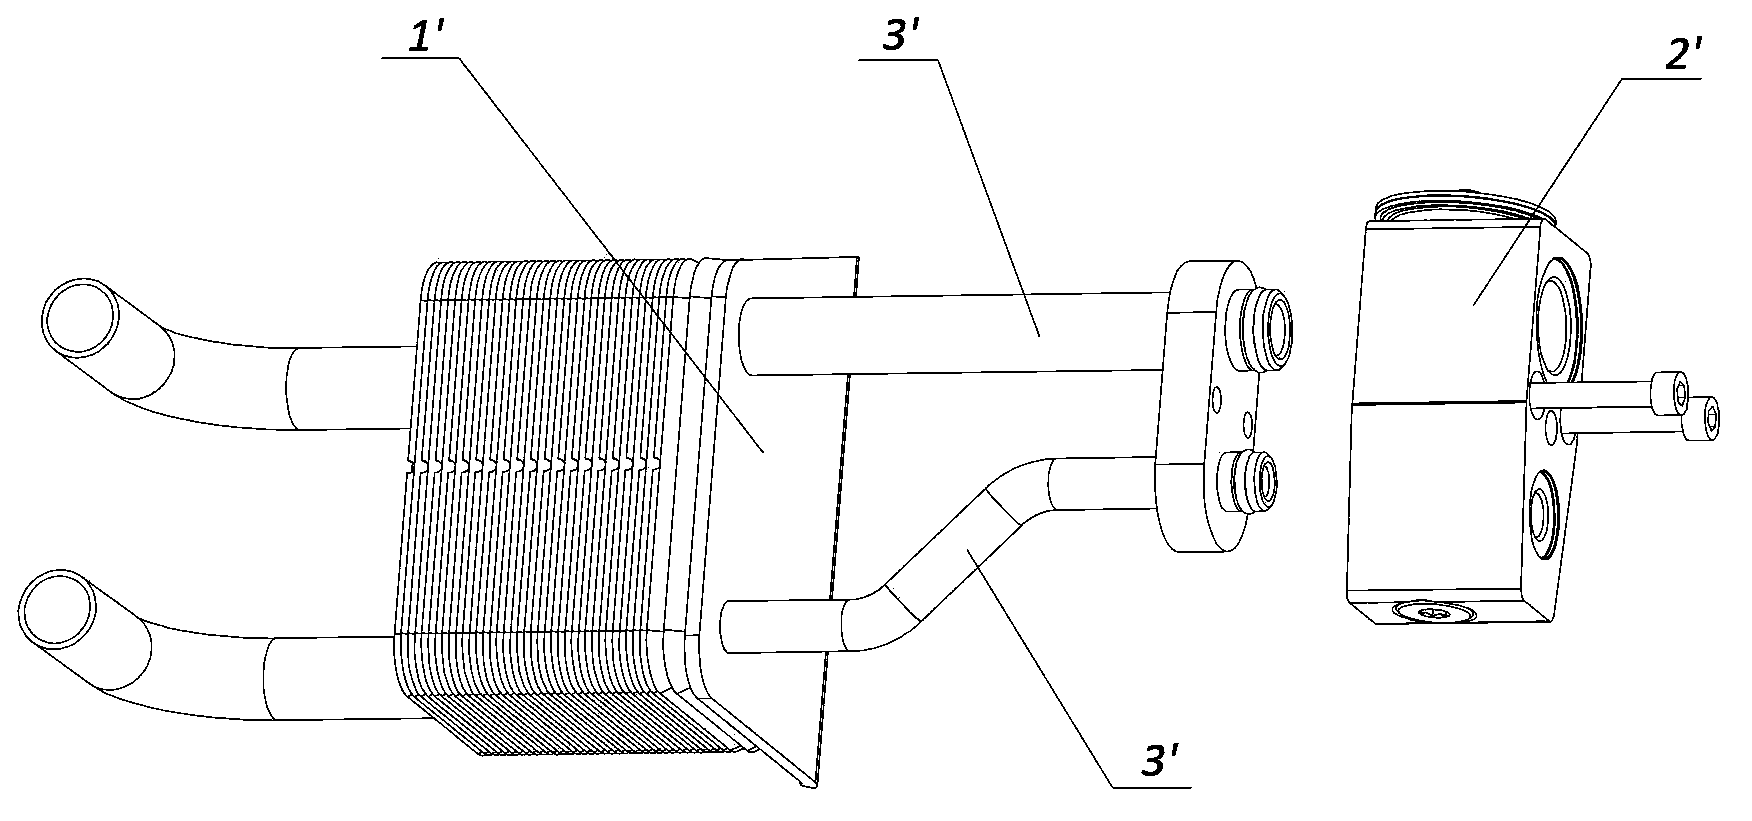 Heat exchanger integrated assembly